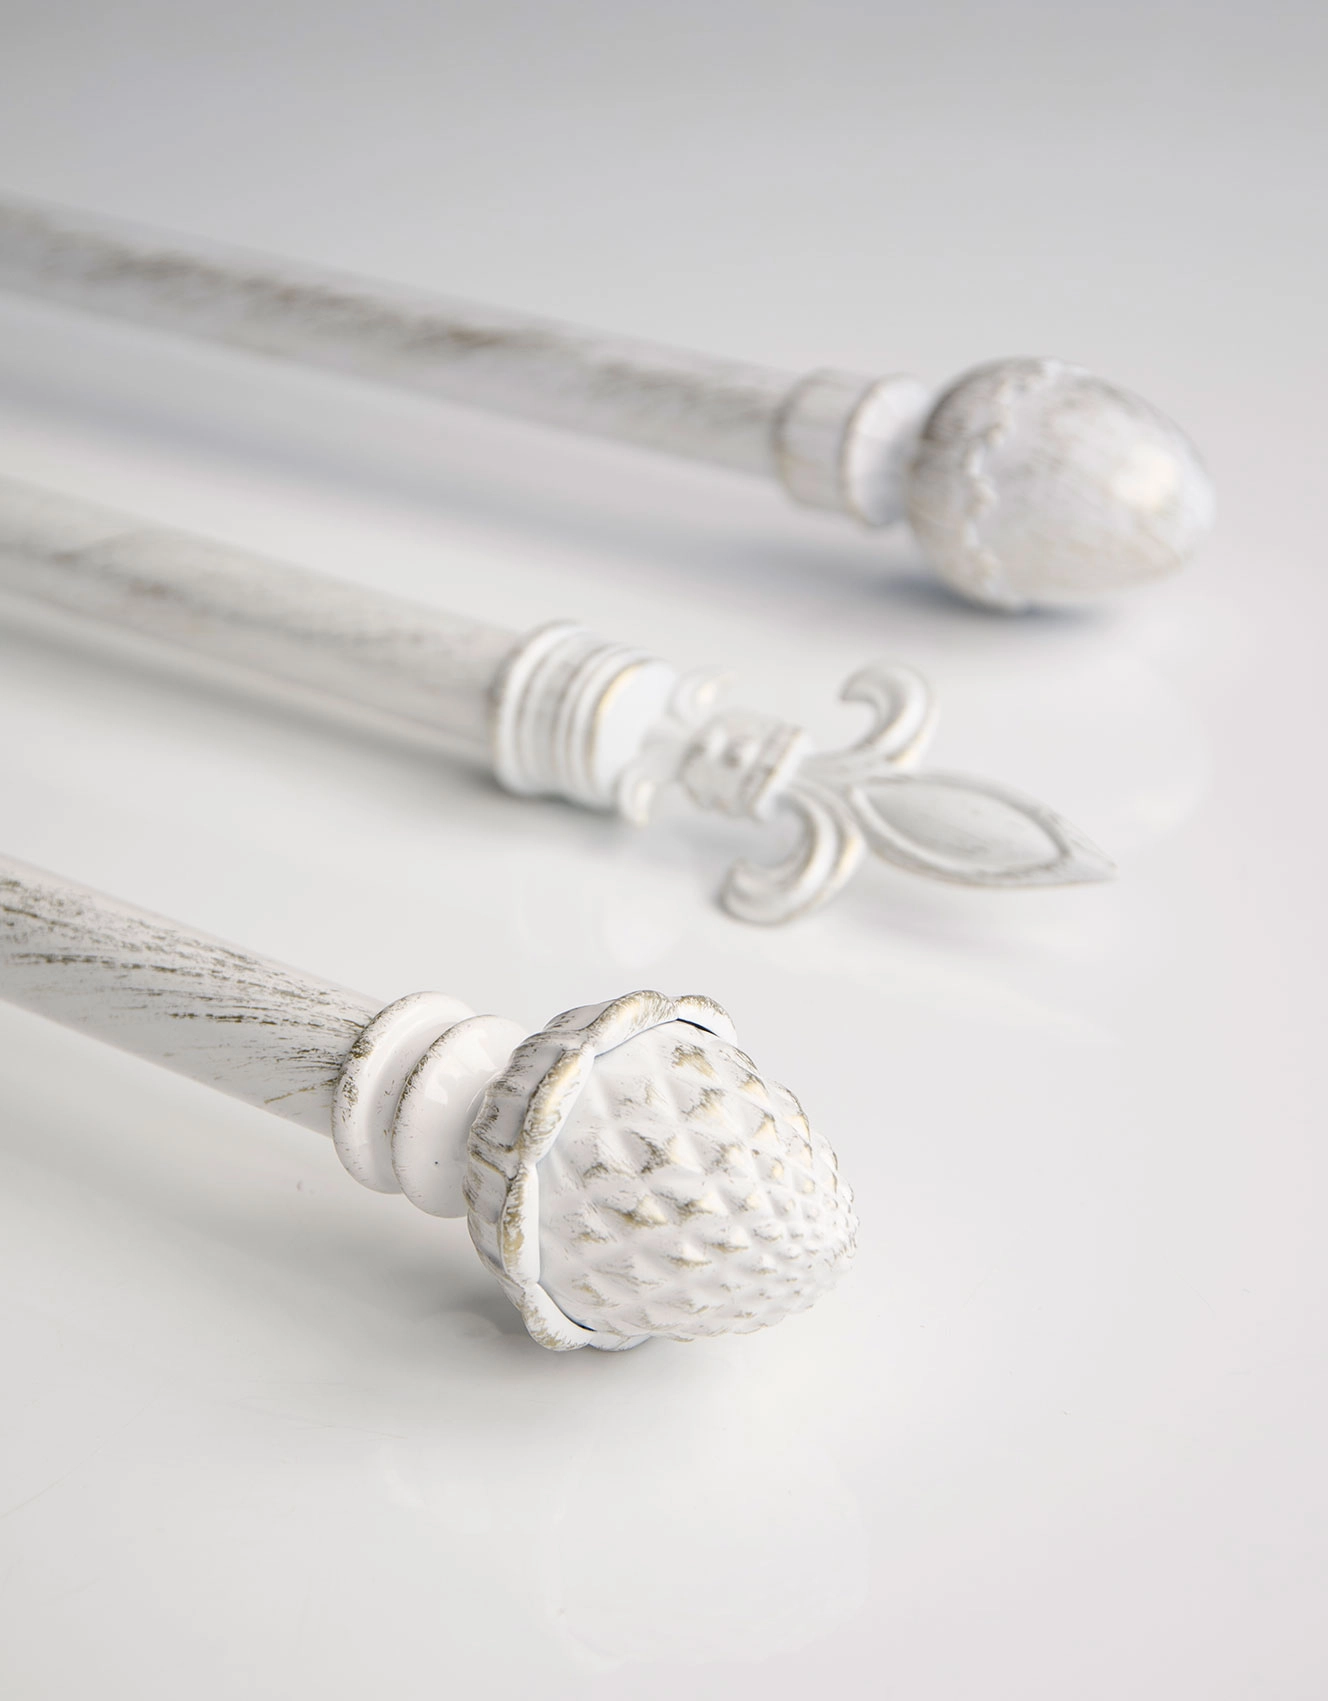 Kotte, Lilja and Elin curtain rods in white gold from Hasta